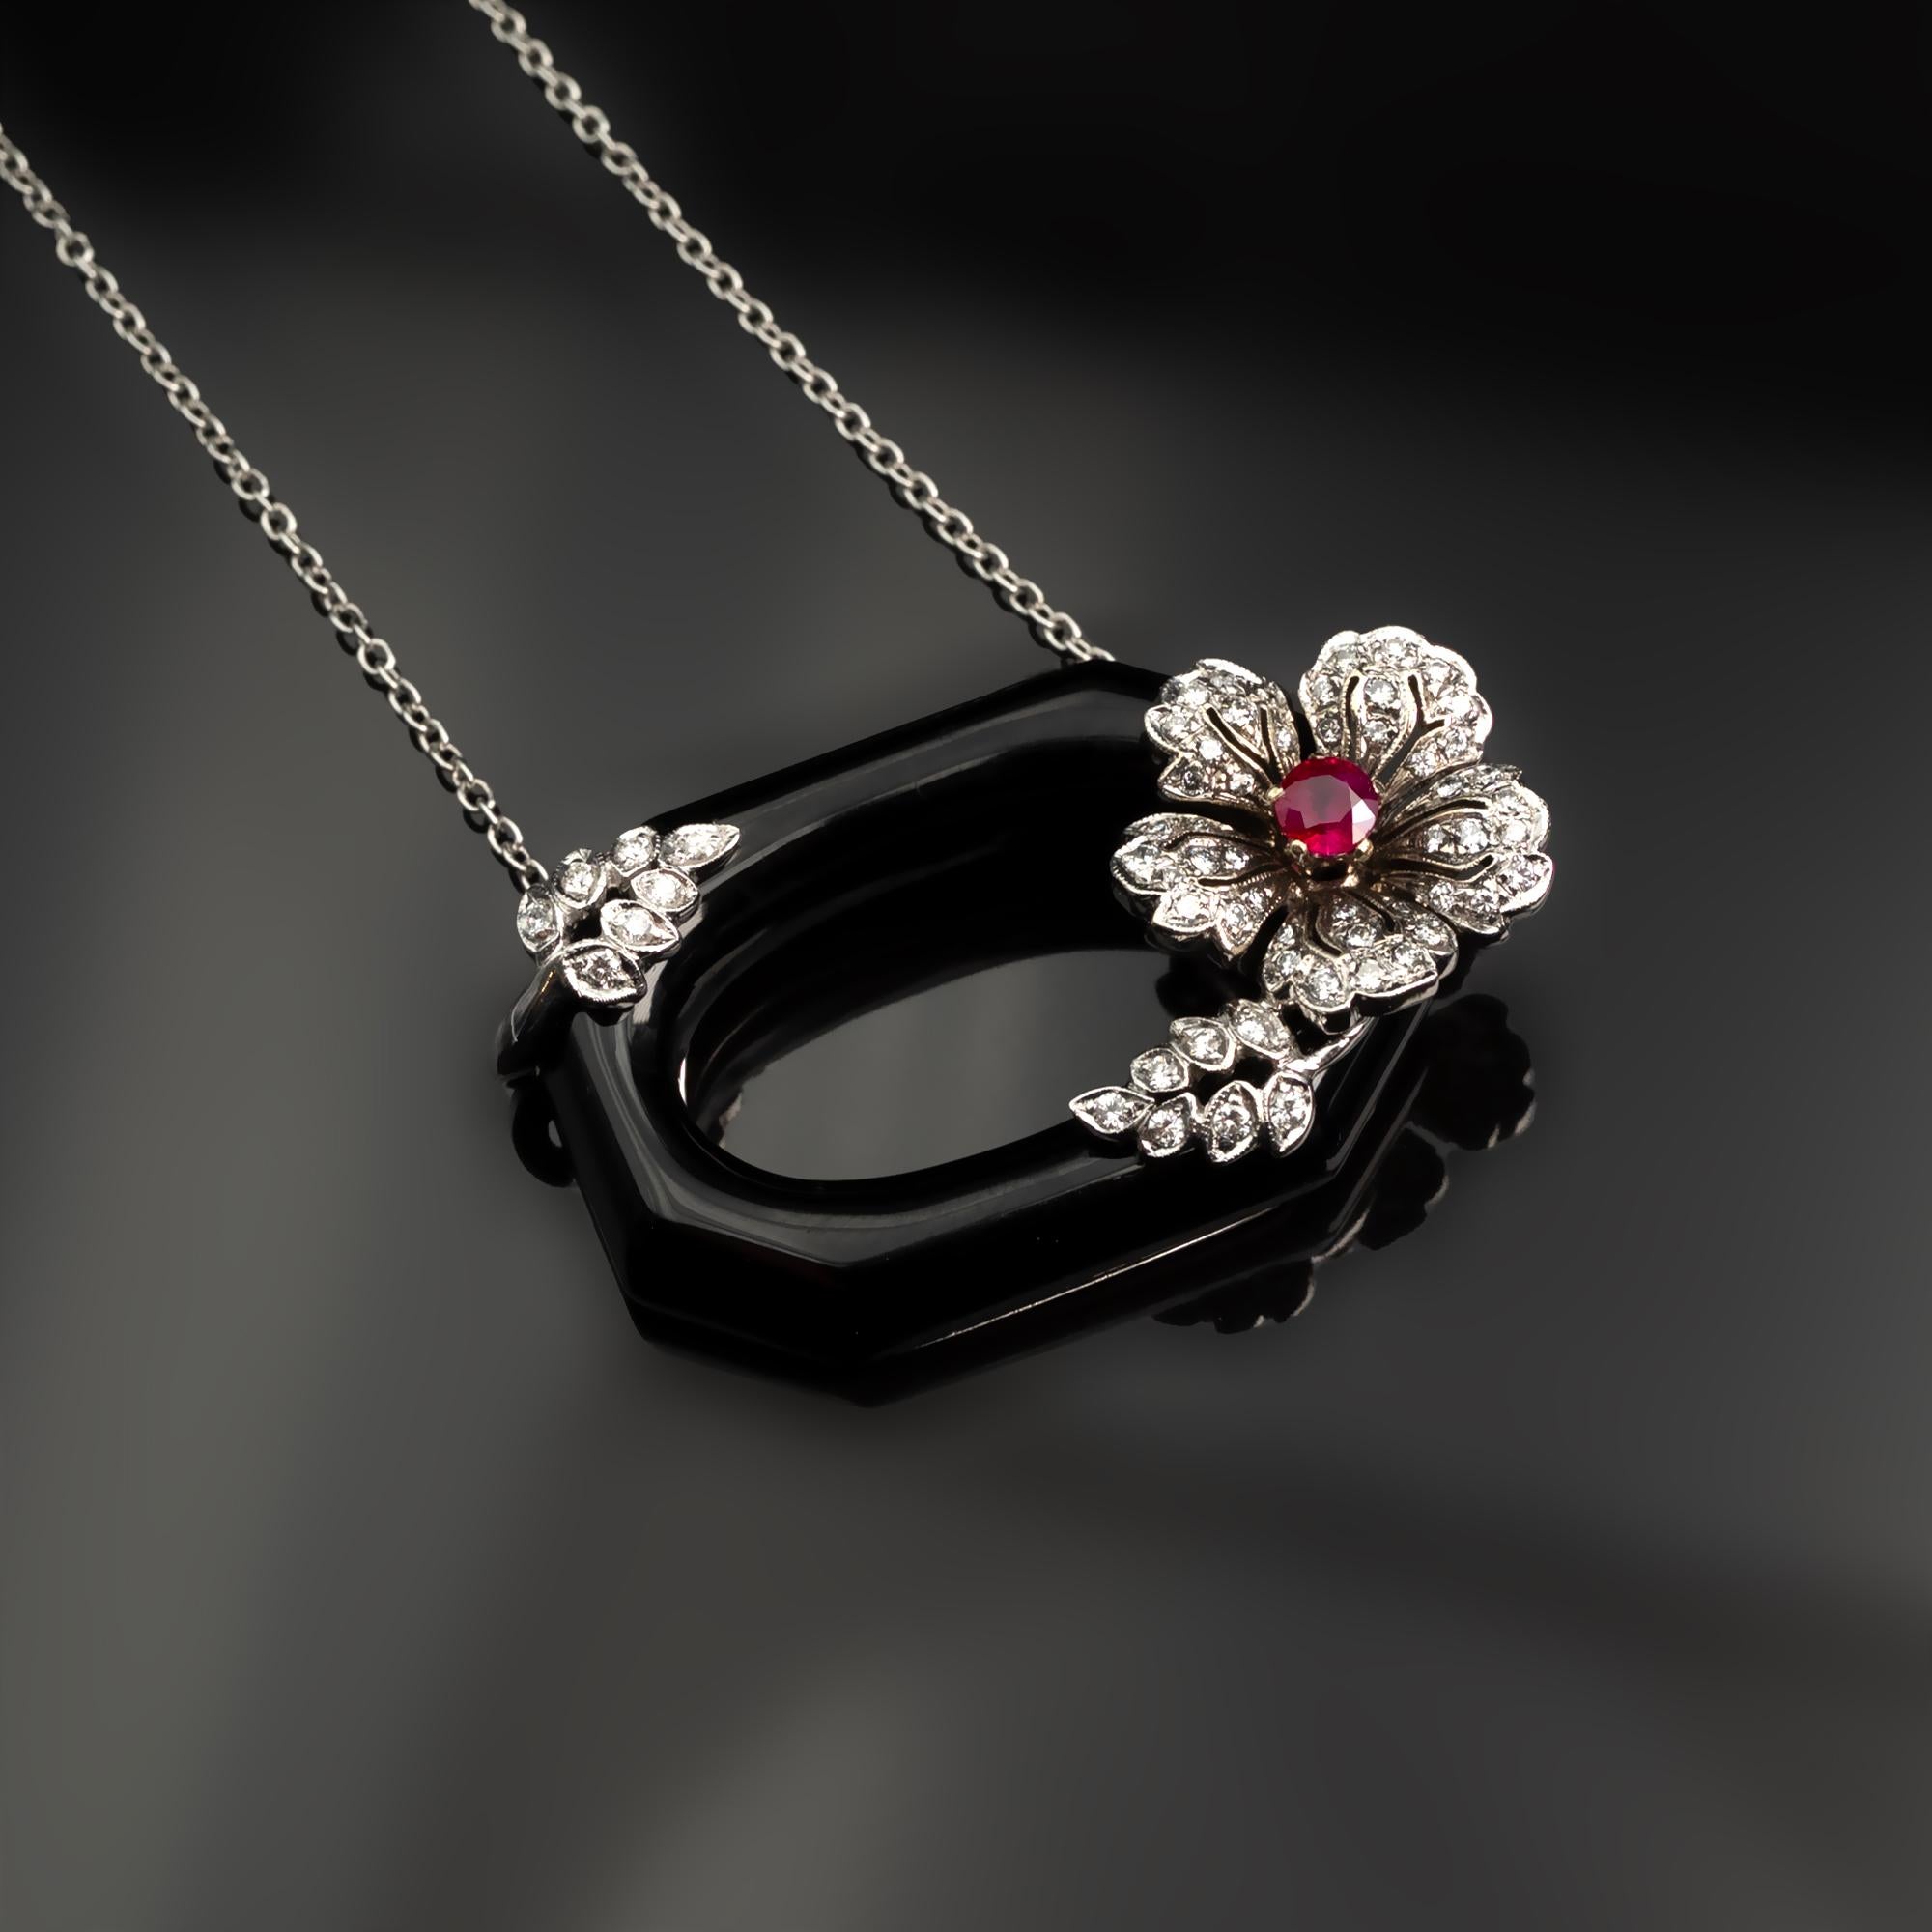 Lovely necklace consisting of a geometrical carved black onyx on which a white gold and diamond flower and leaves are wrapped. In the center of the flower, a vid red ruby is set.
The make is excellent, as well as the quality of gemstones used; a